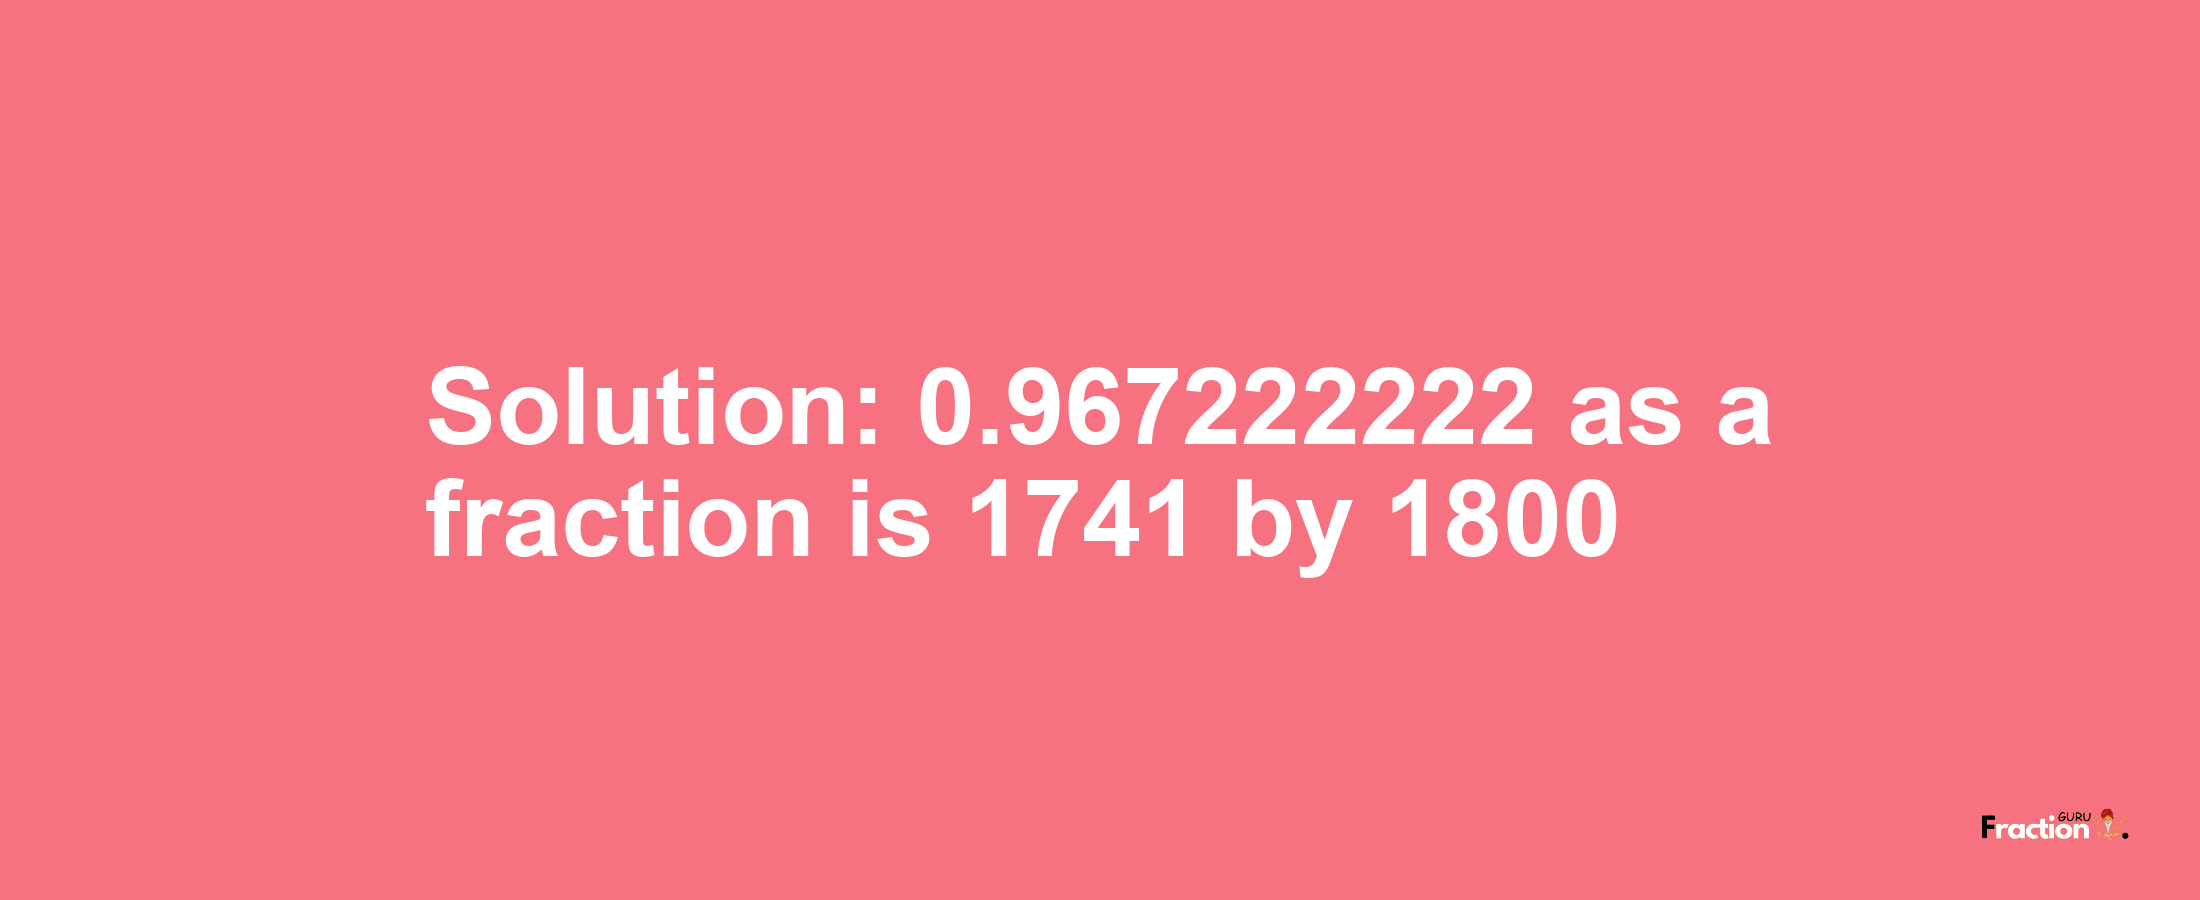 Solution:0.967222222 as a fraction is 1741/1800